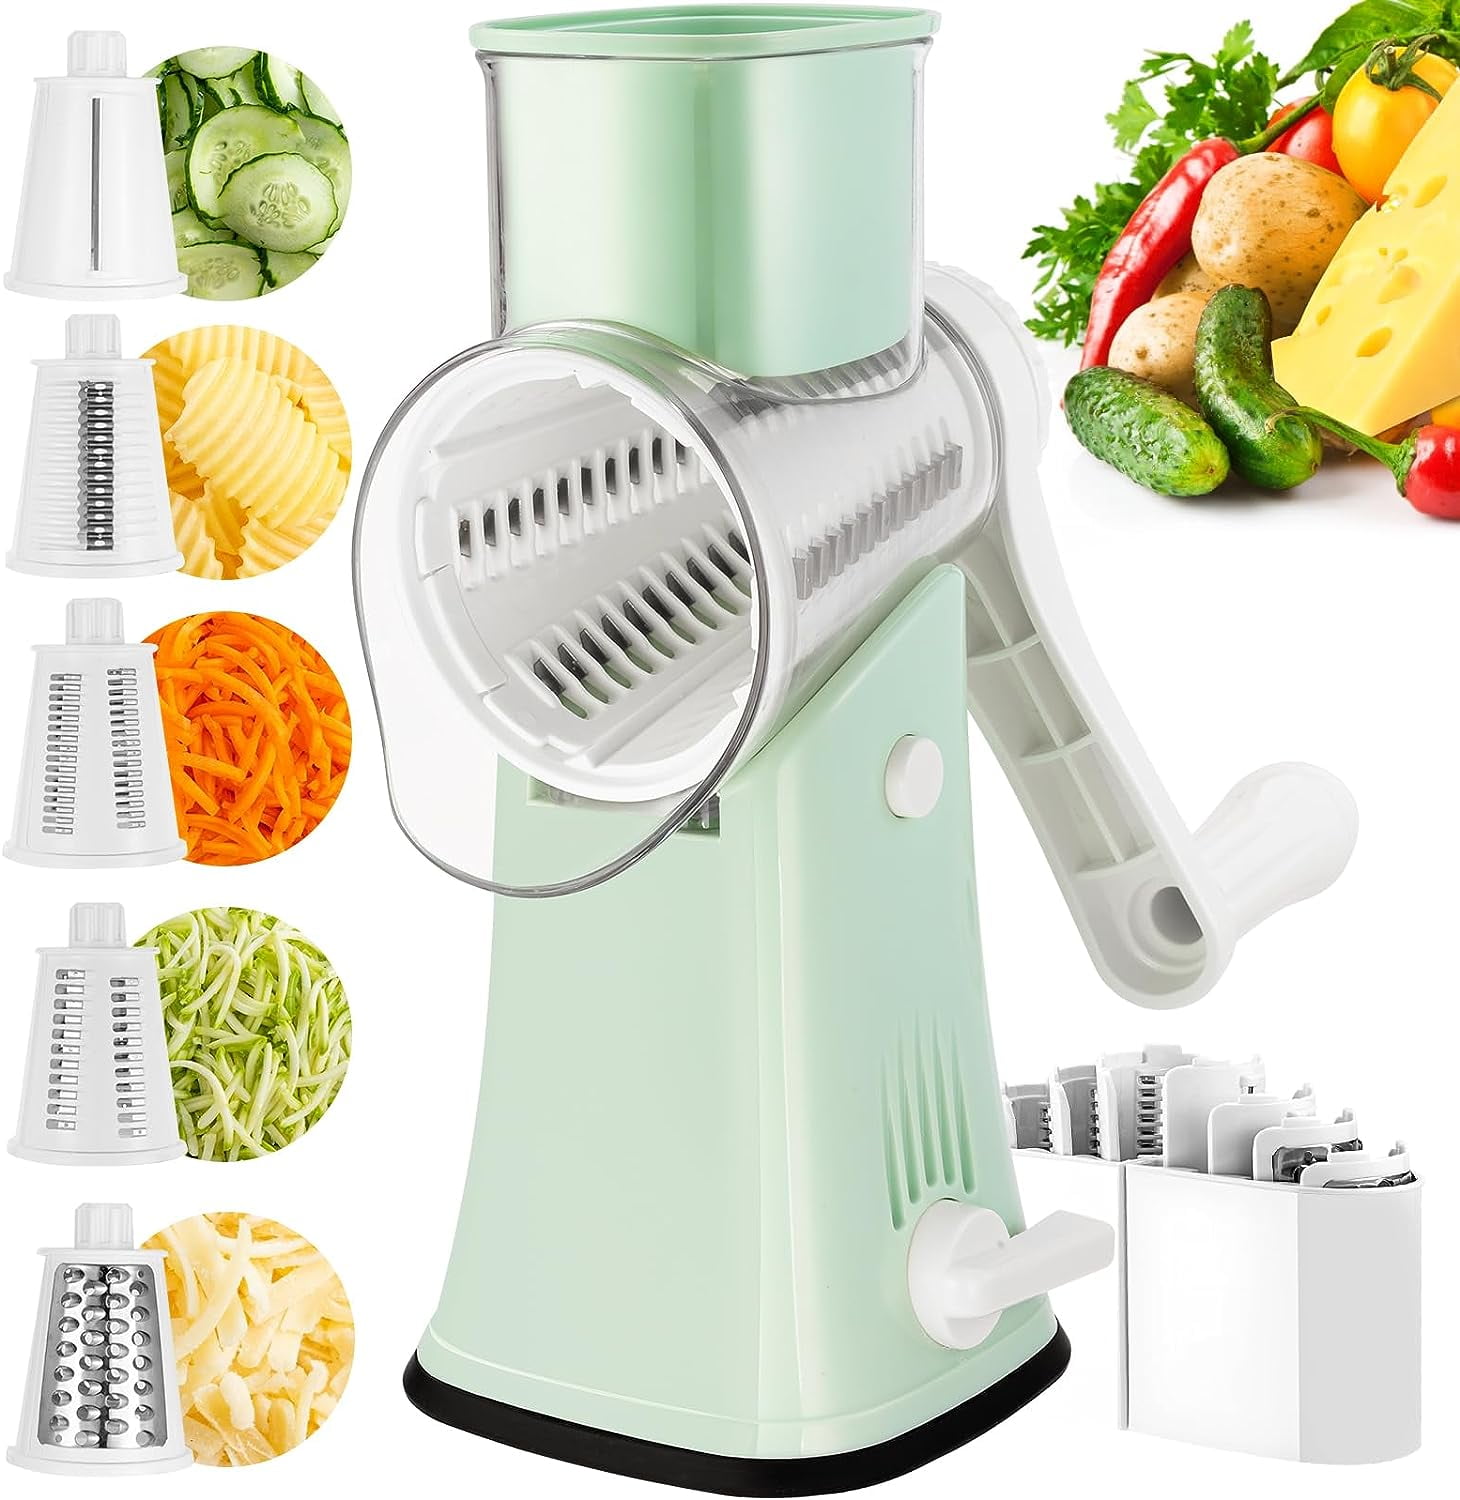  Sagno Cheese Grater  Rotary Cheese Grater with Handle